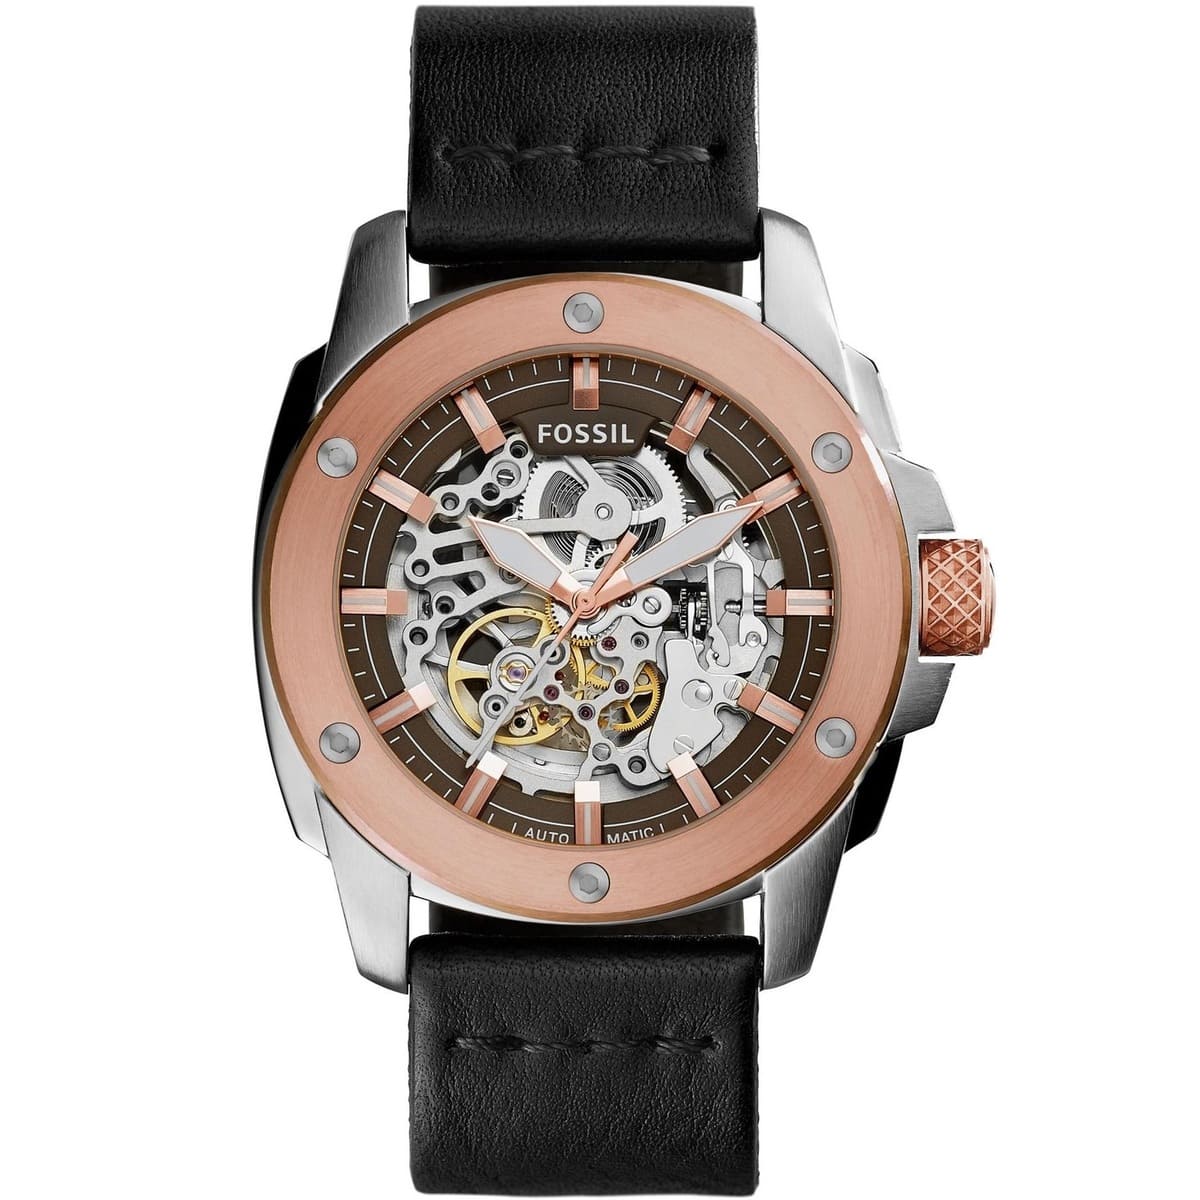 me3082-original-automatic-fossil-watch-leather-men